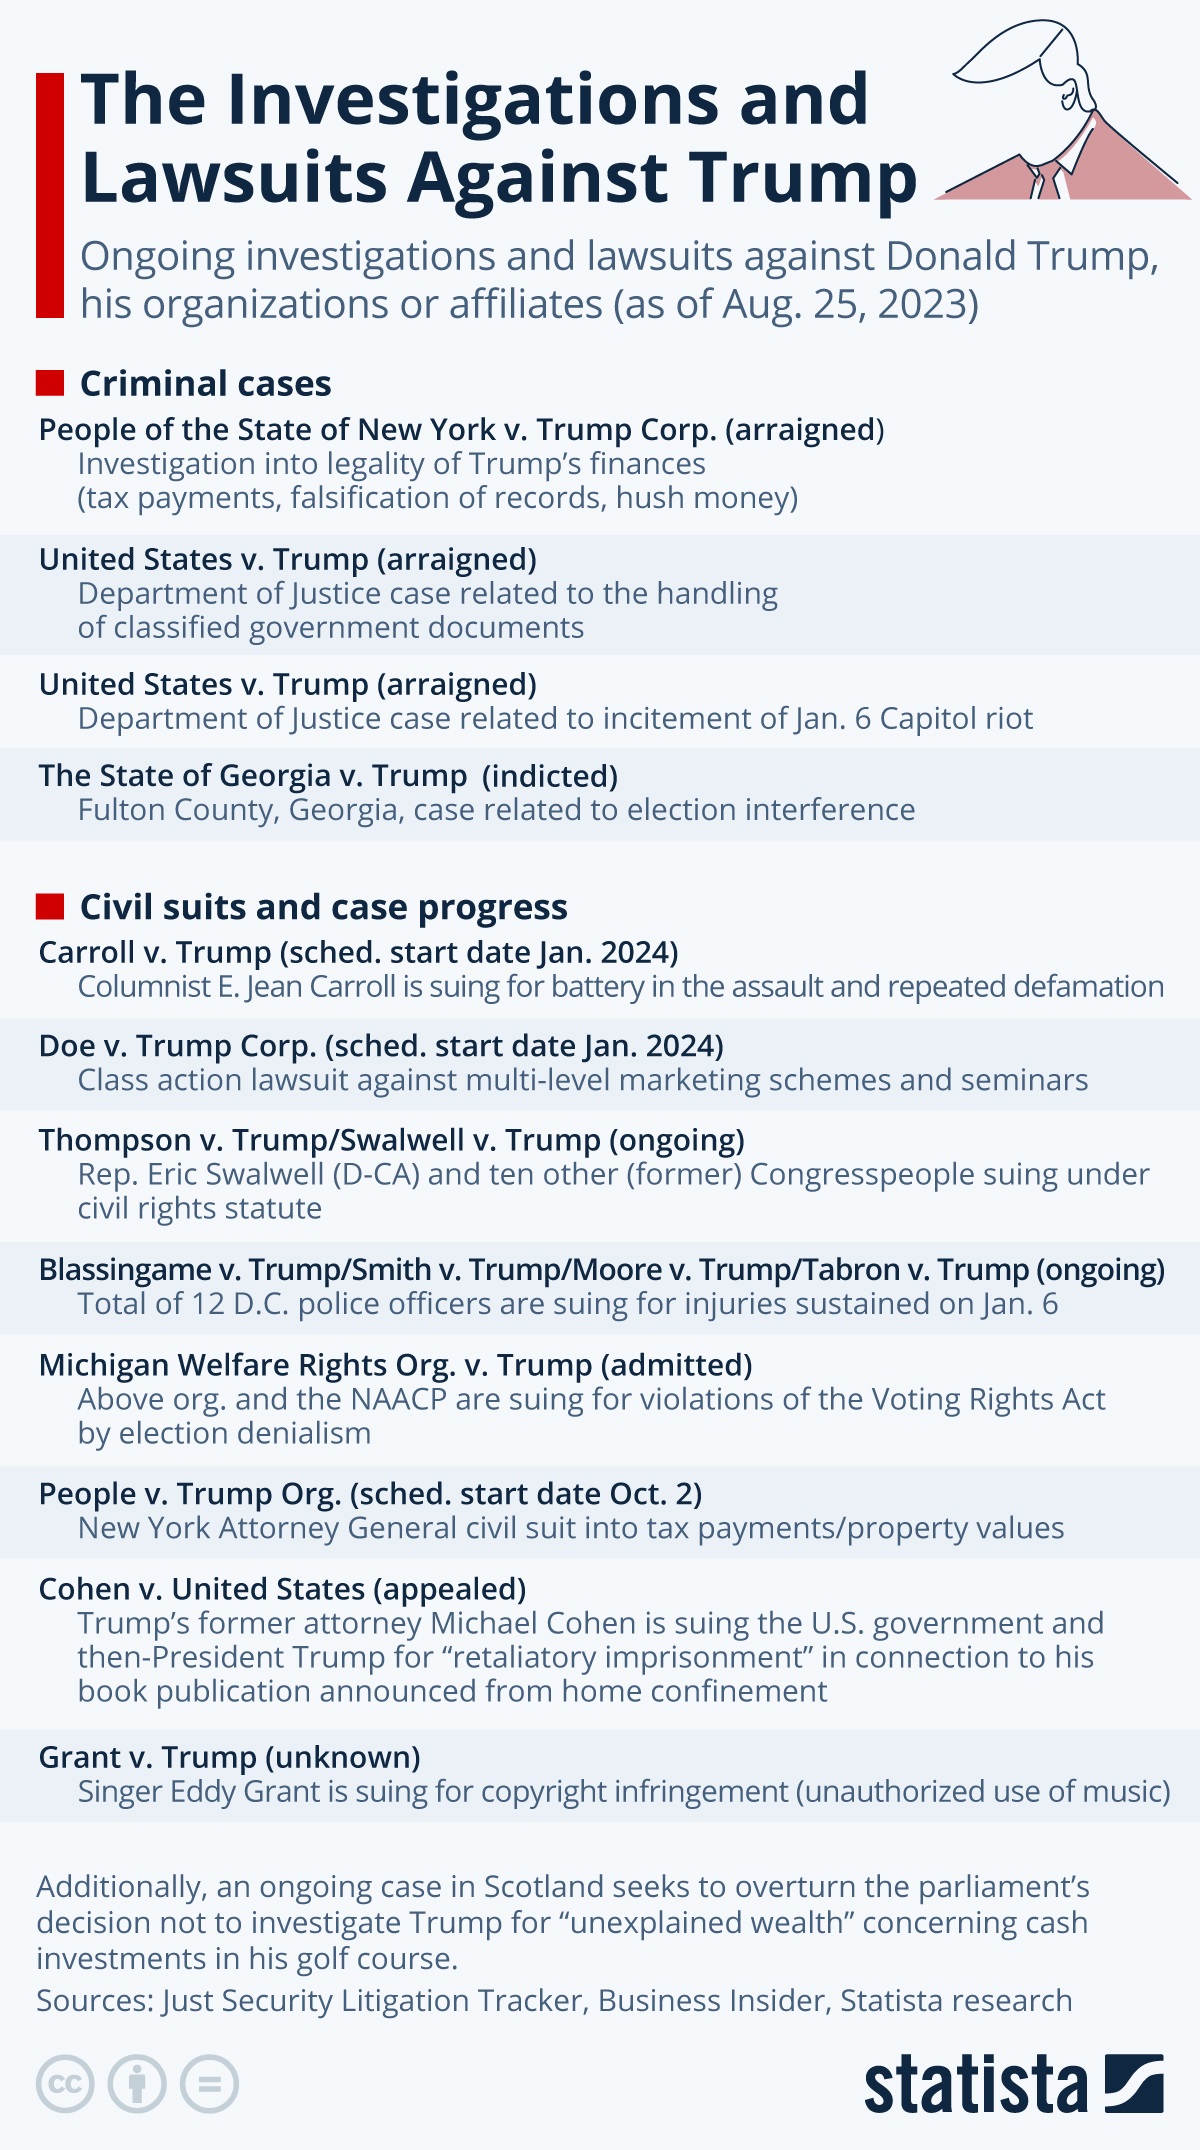 Infographic: The Investigations and Lawsuits Against Trump | Statista